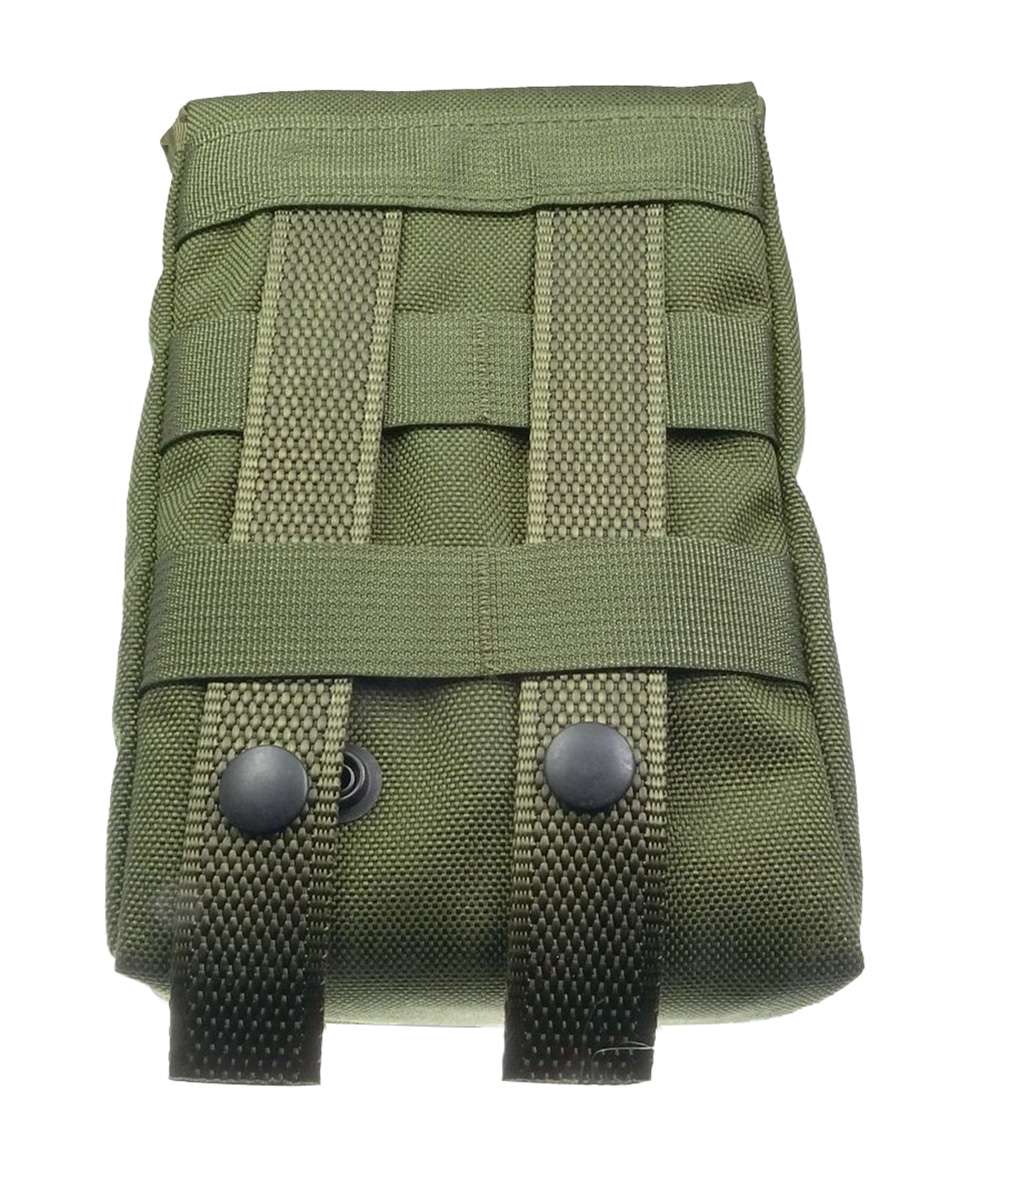 ESEE Large Tin Pouch - OD Green